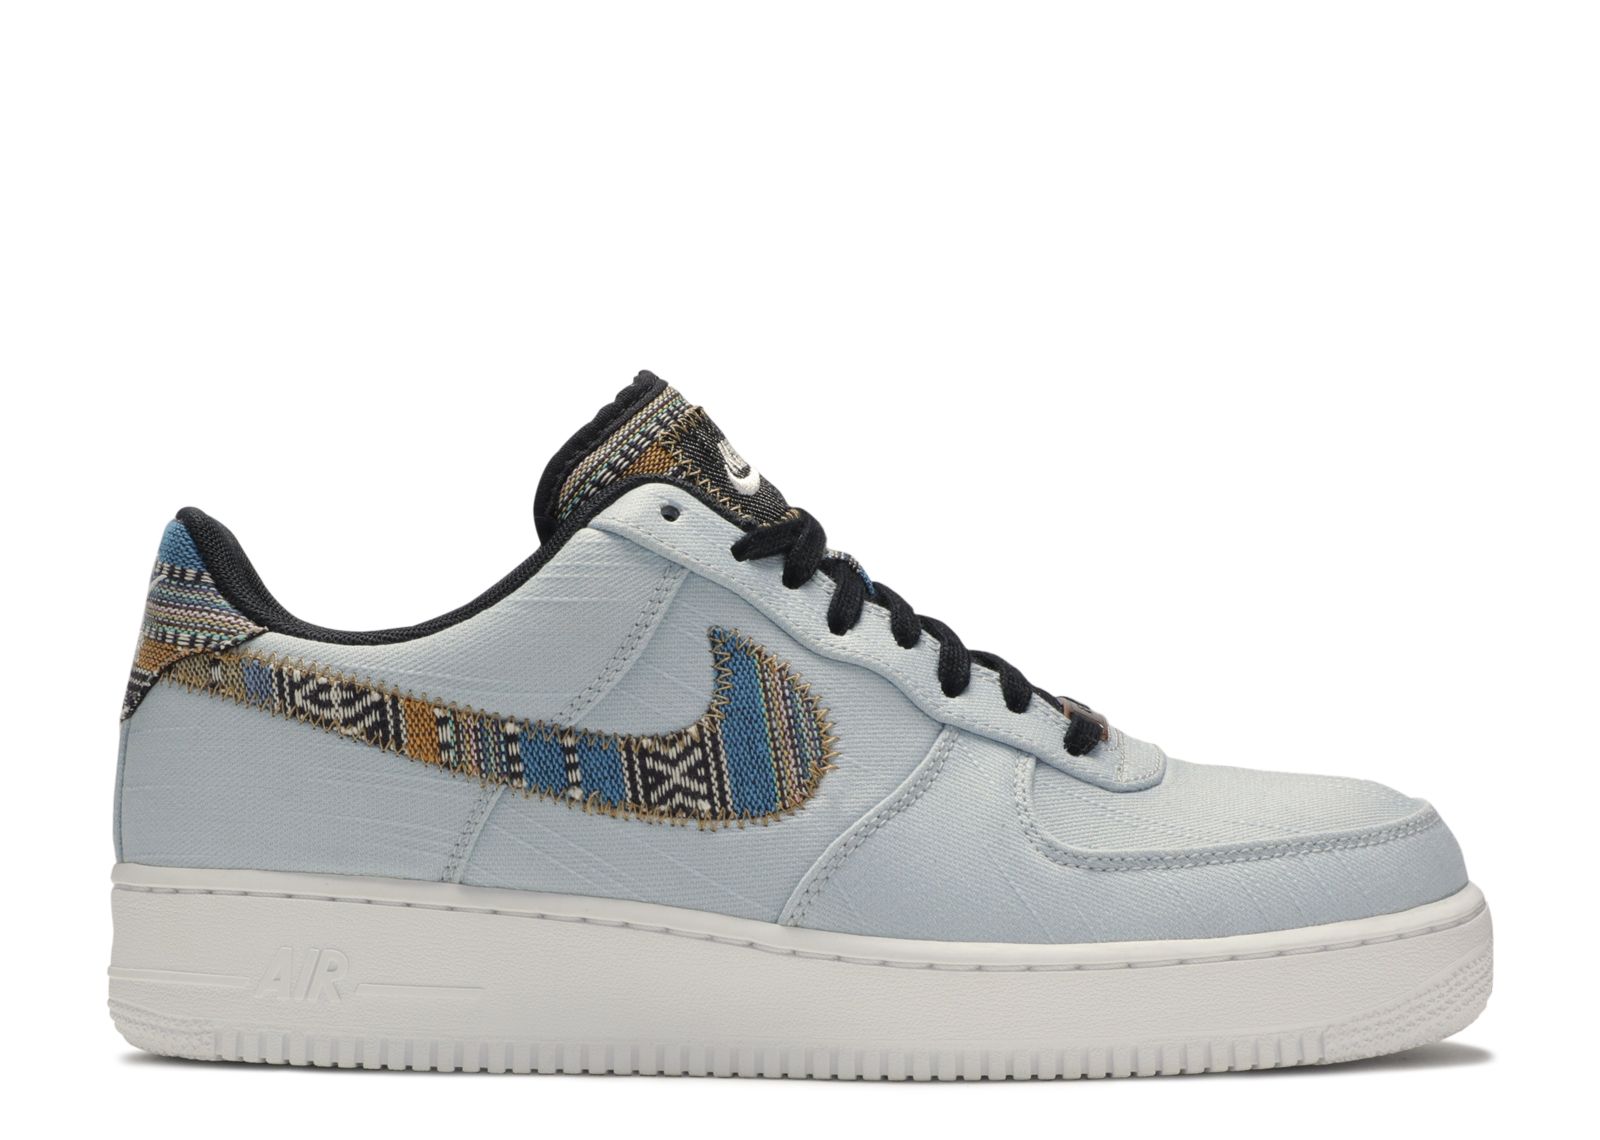 Air Force 1 Low LV8 Double Swoosh Light Armory Blue - SNEAKERGALLERY